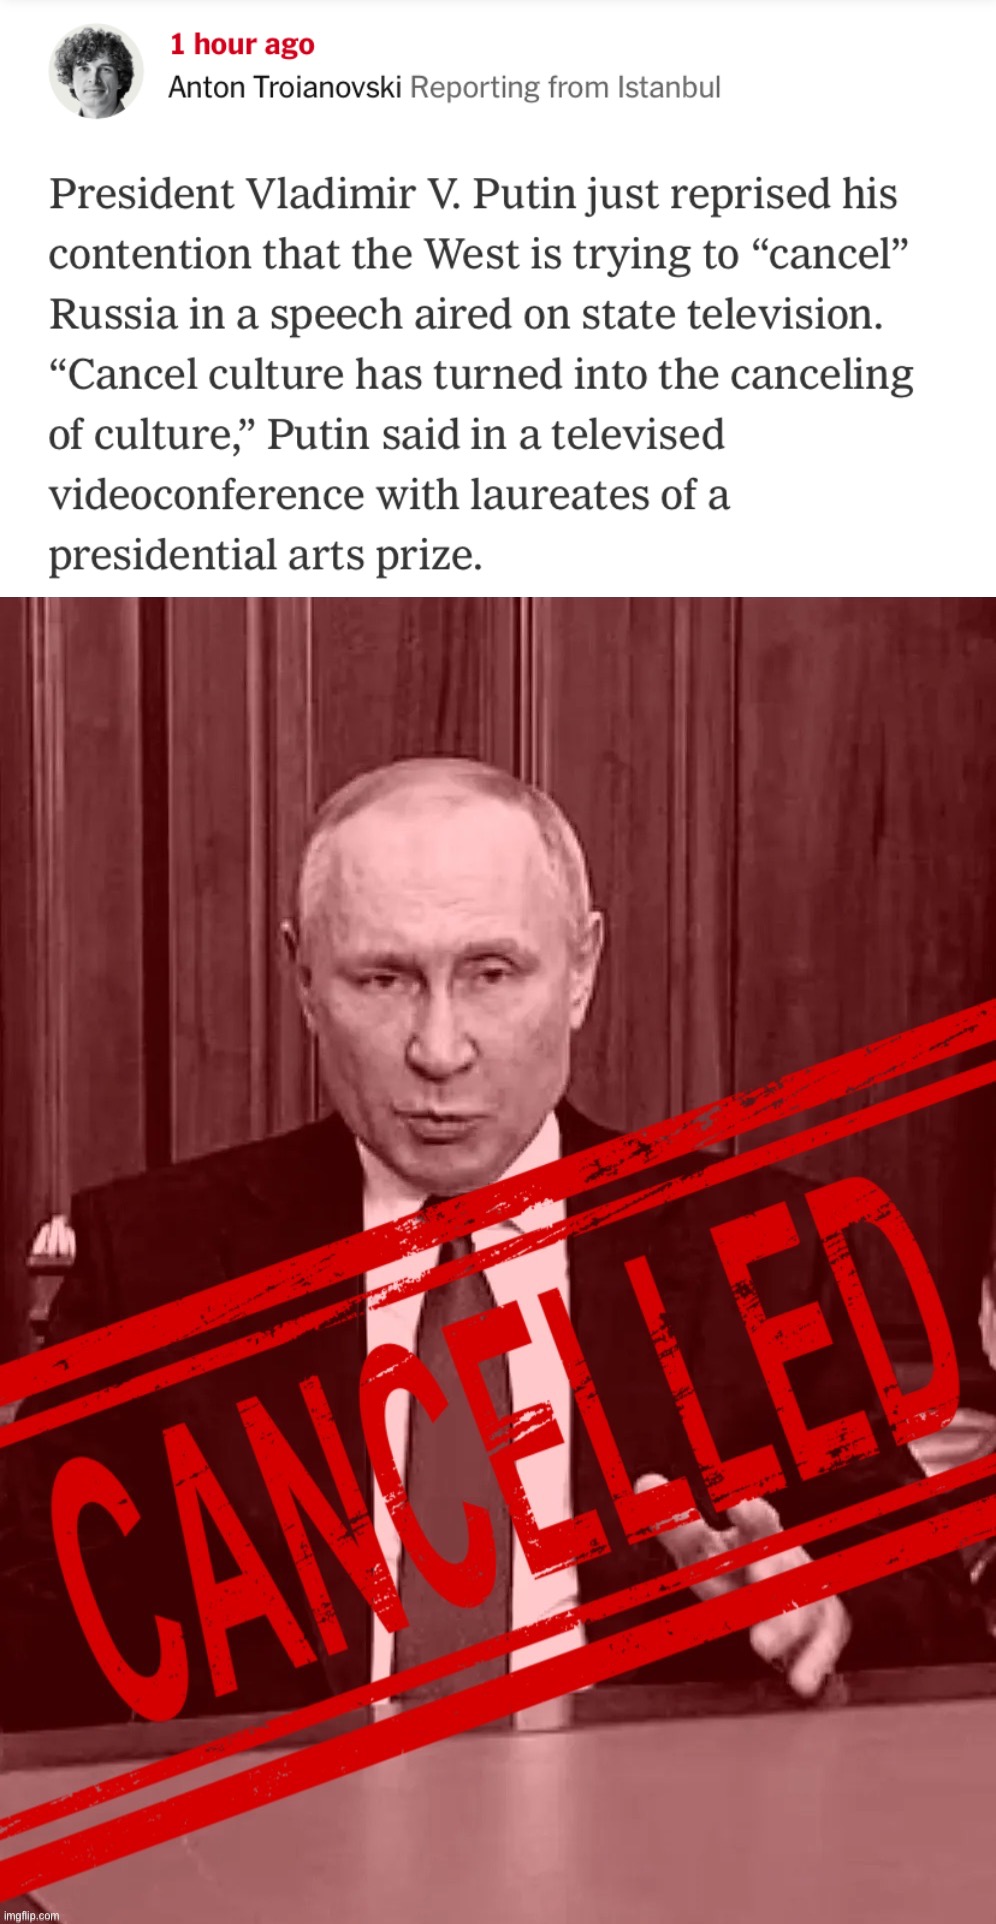 Guess Putin’s not ready to talk about how he’s the one trying to #CANCEL Ukrainian culture and identity is he? XD | image tagged in putin cancel culture,vladimir putin cancelled,putin,vladimir putin,cancel culture,hypocrite | made w/ Imgflip meme maker